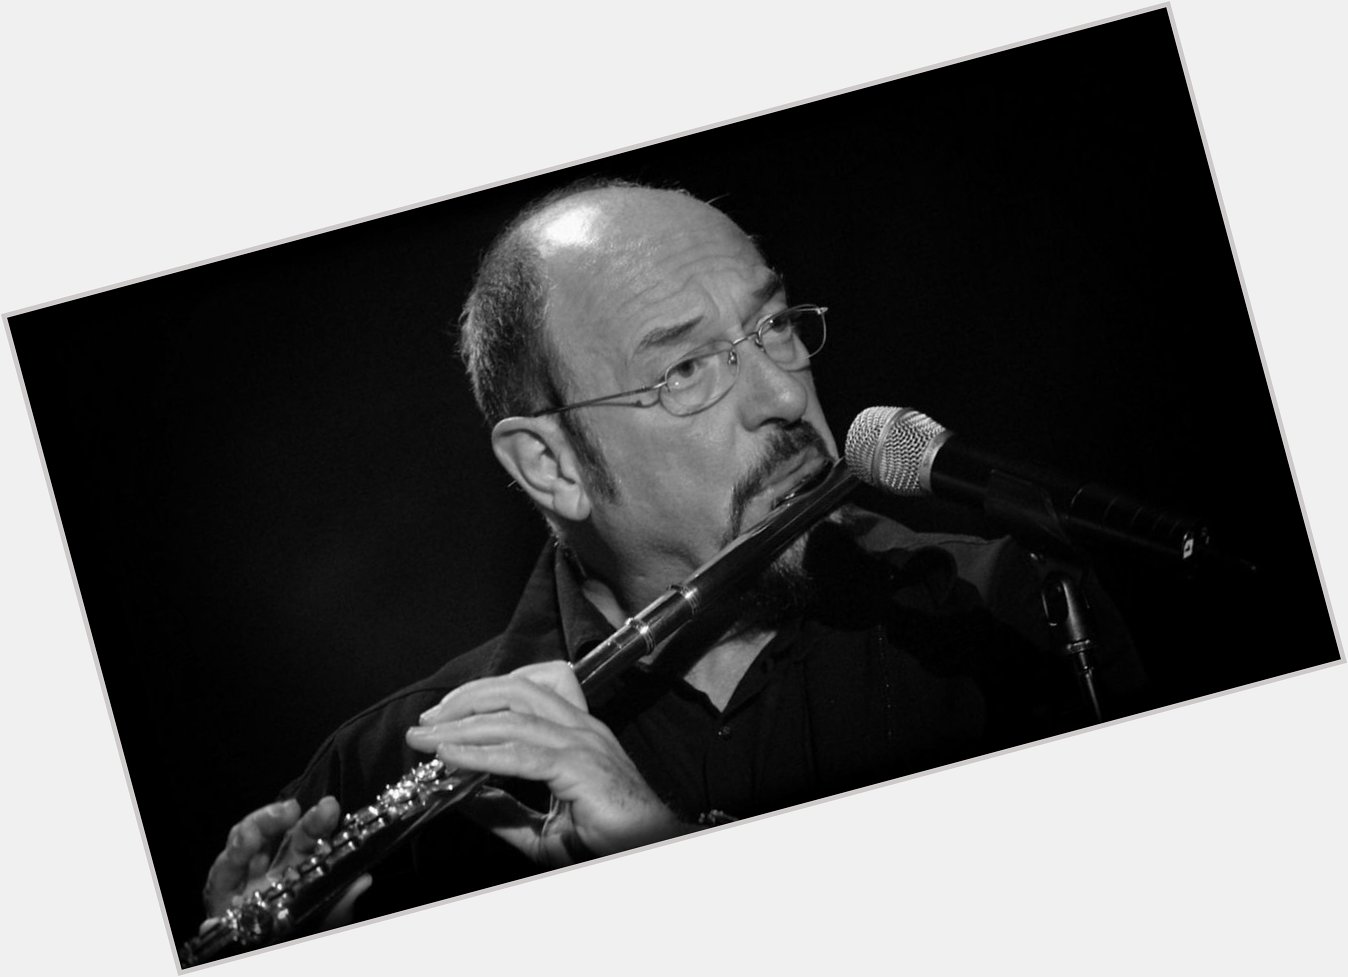 Happy birthday to Ian Anderson, who is 70 today! 